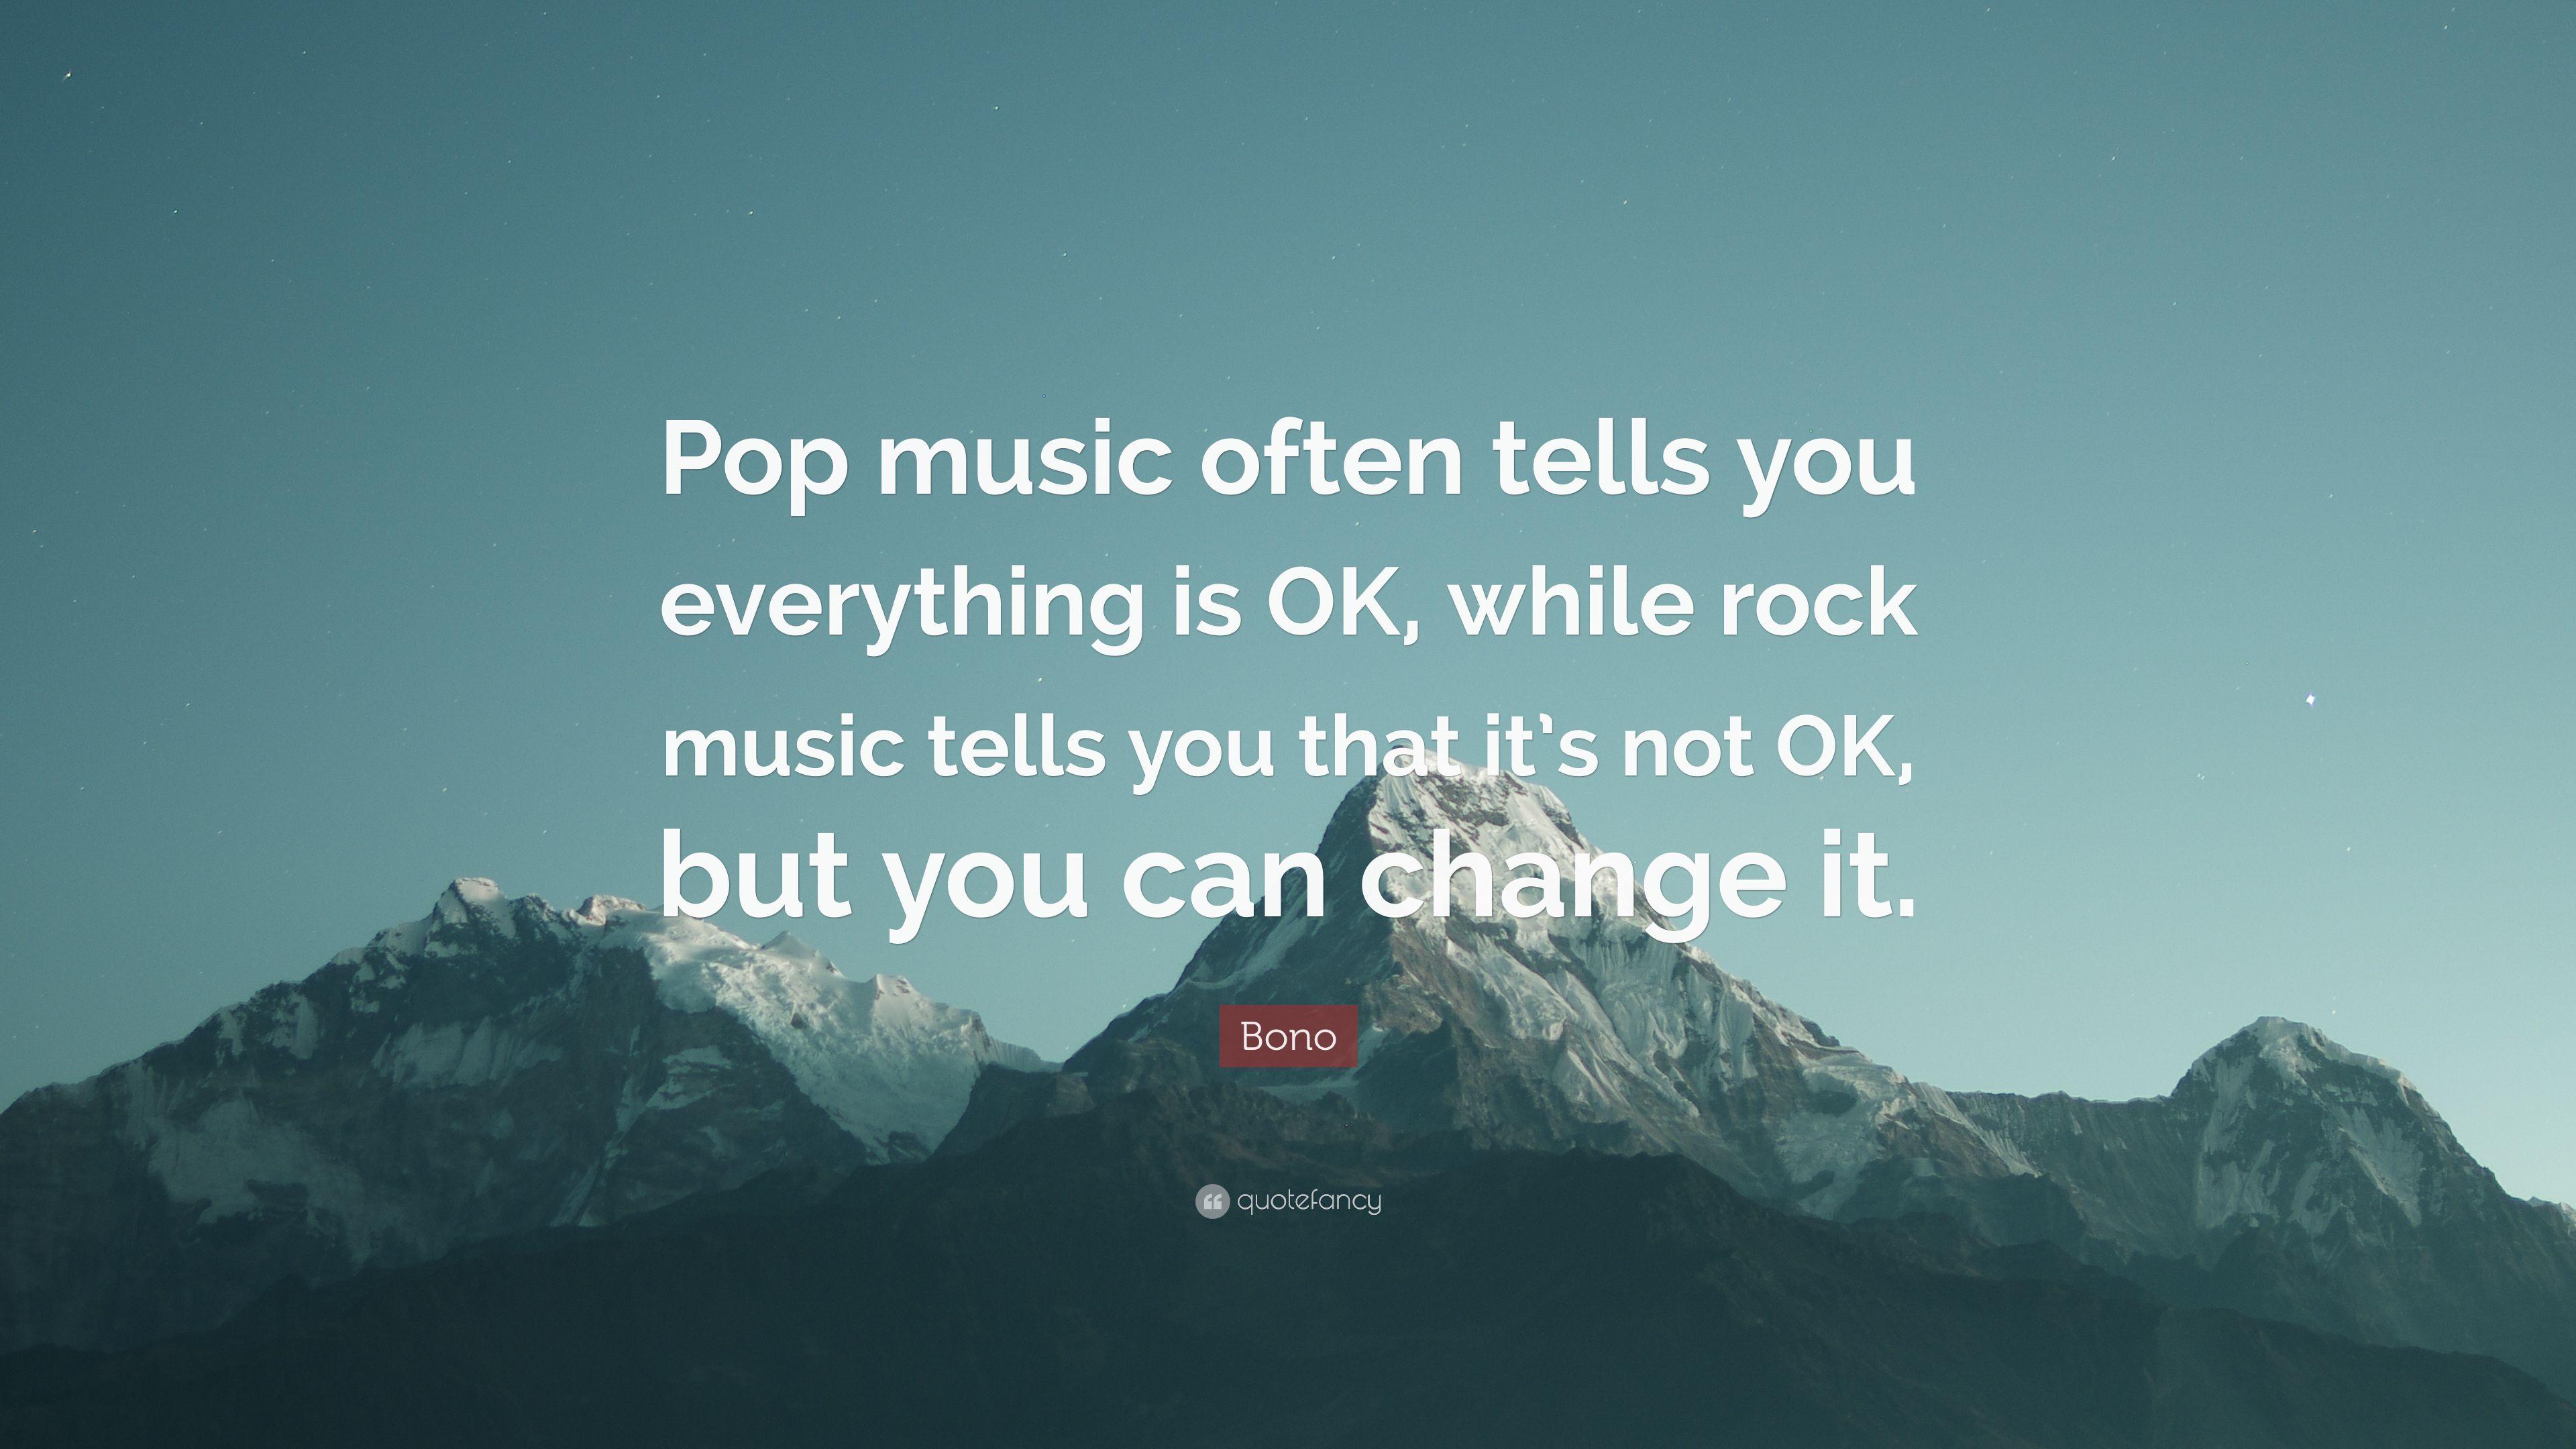 Bono Quote: “Pop music often tells you everything is OK, while